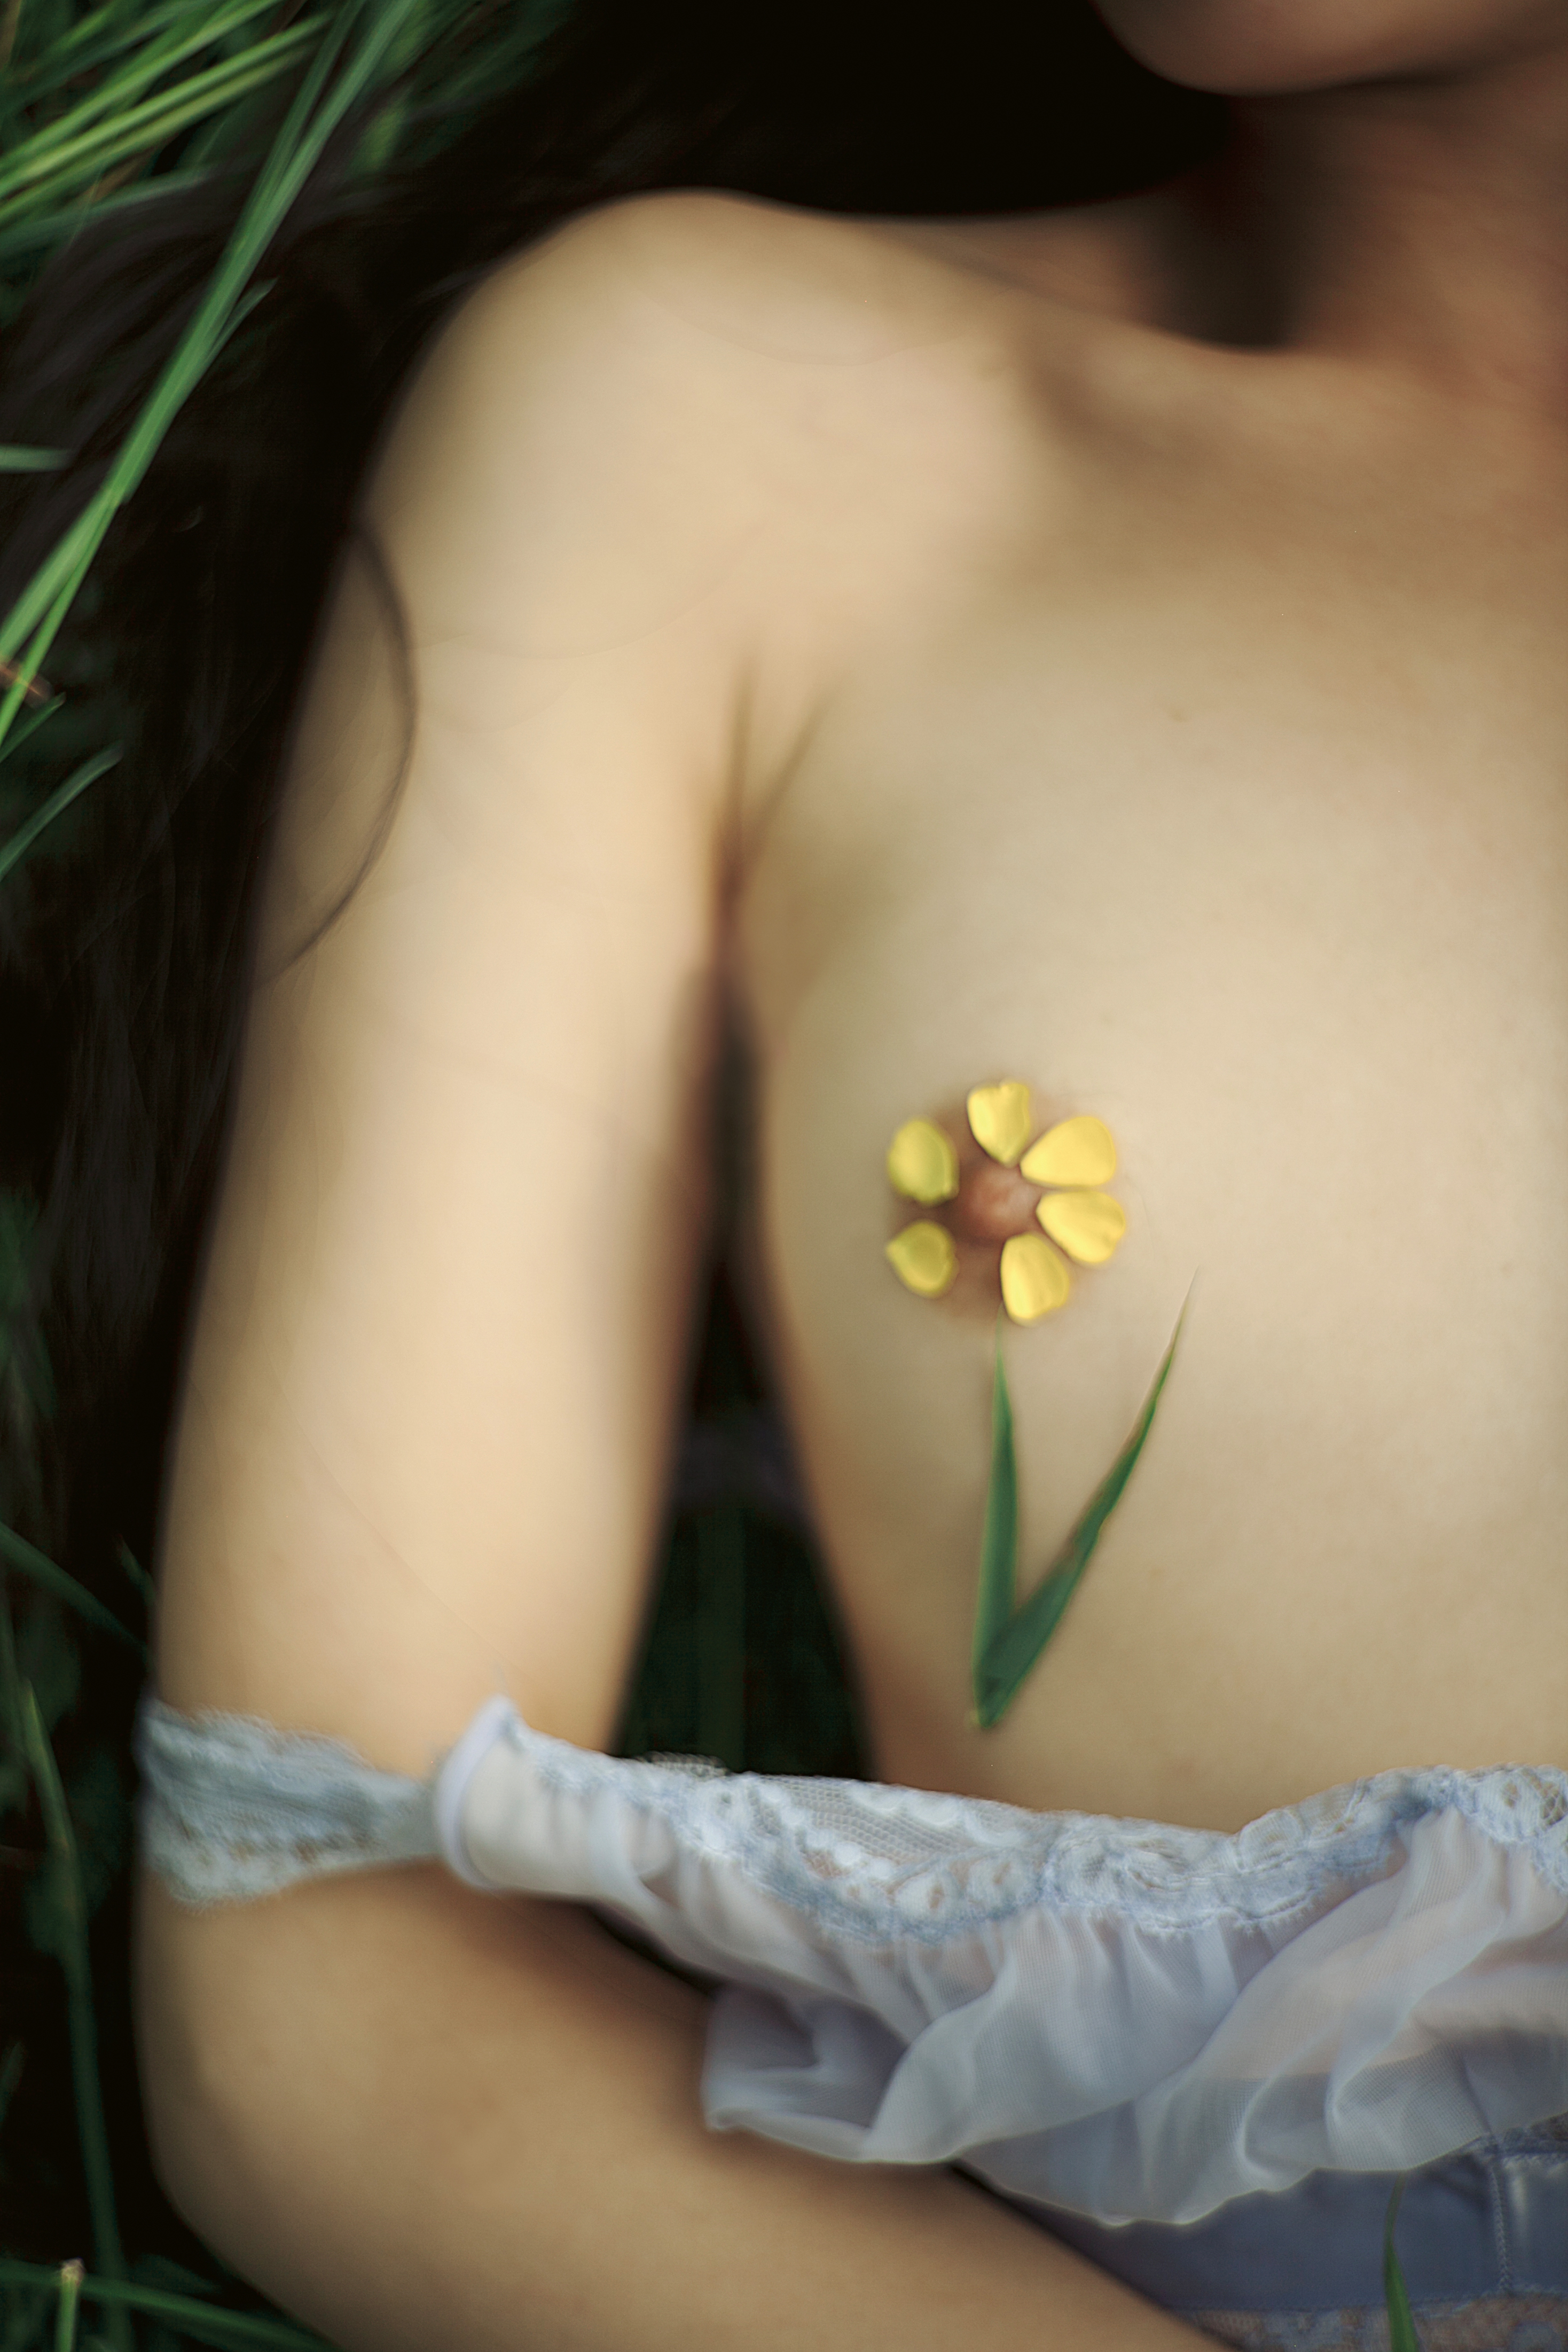 a flower built around a nipple as a girl lays on the grass